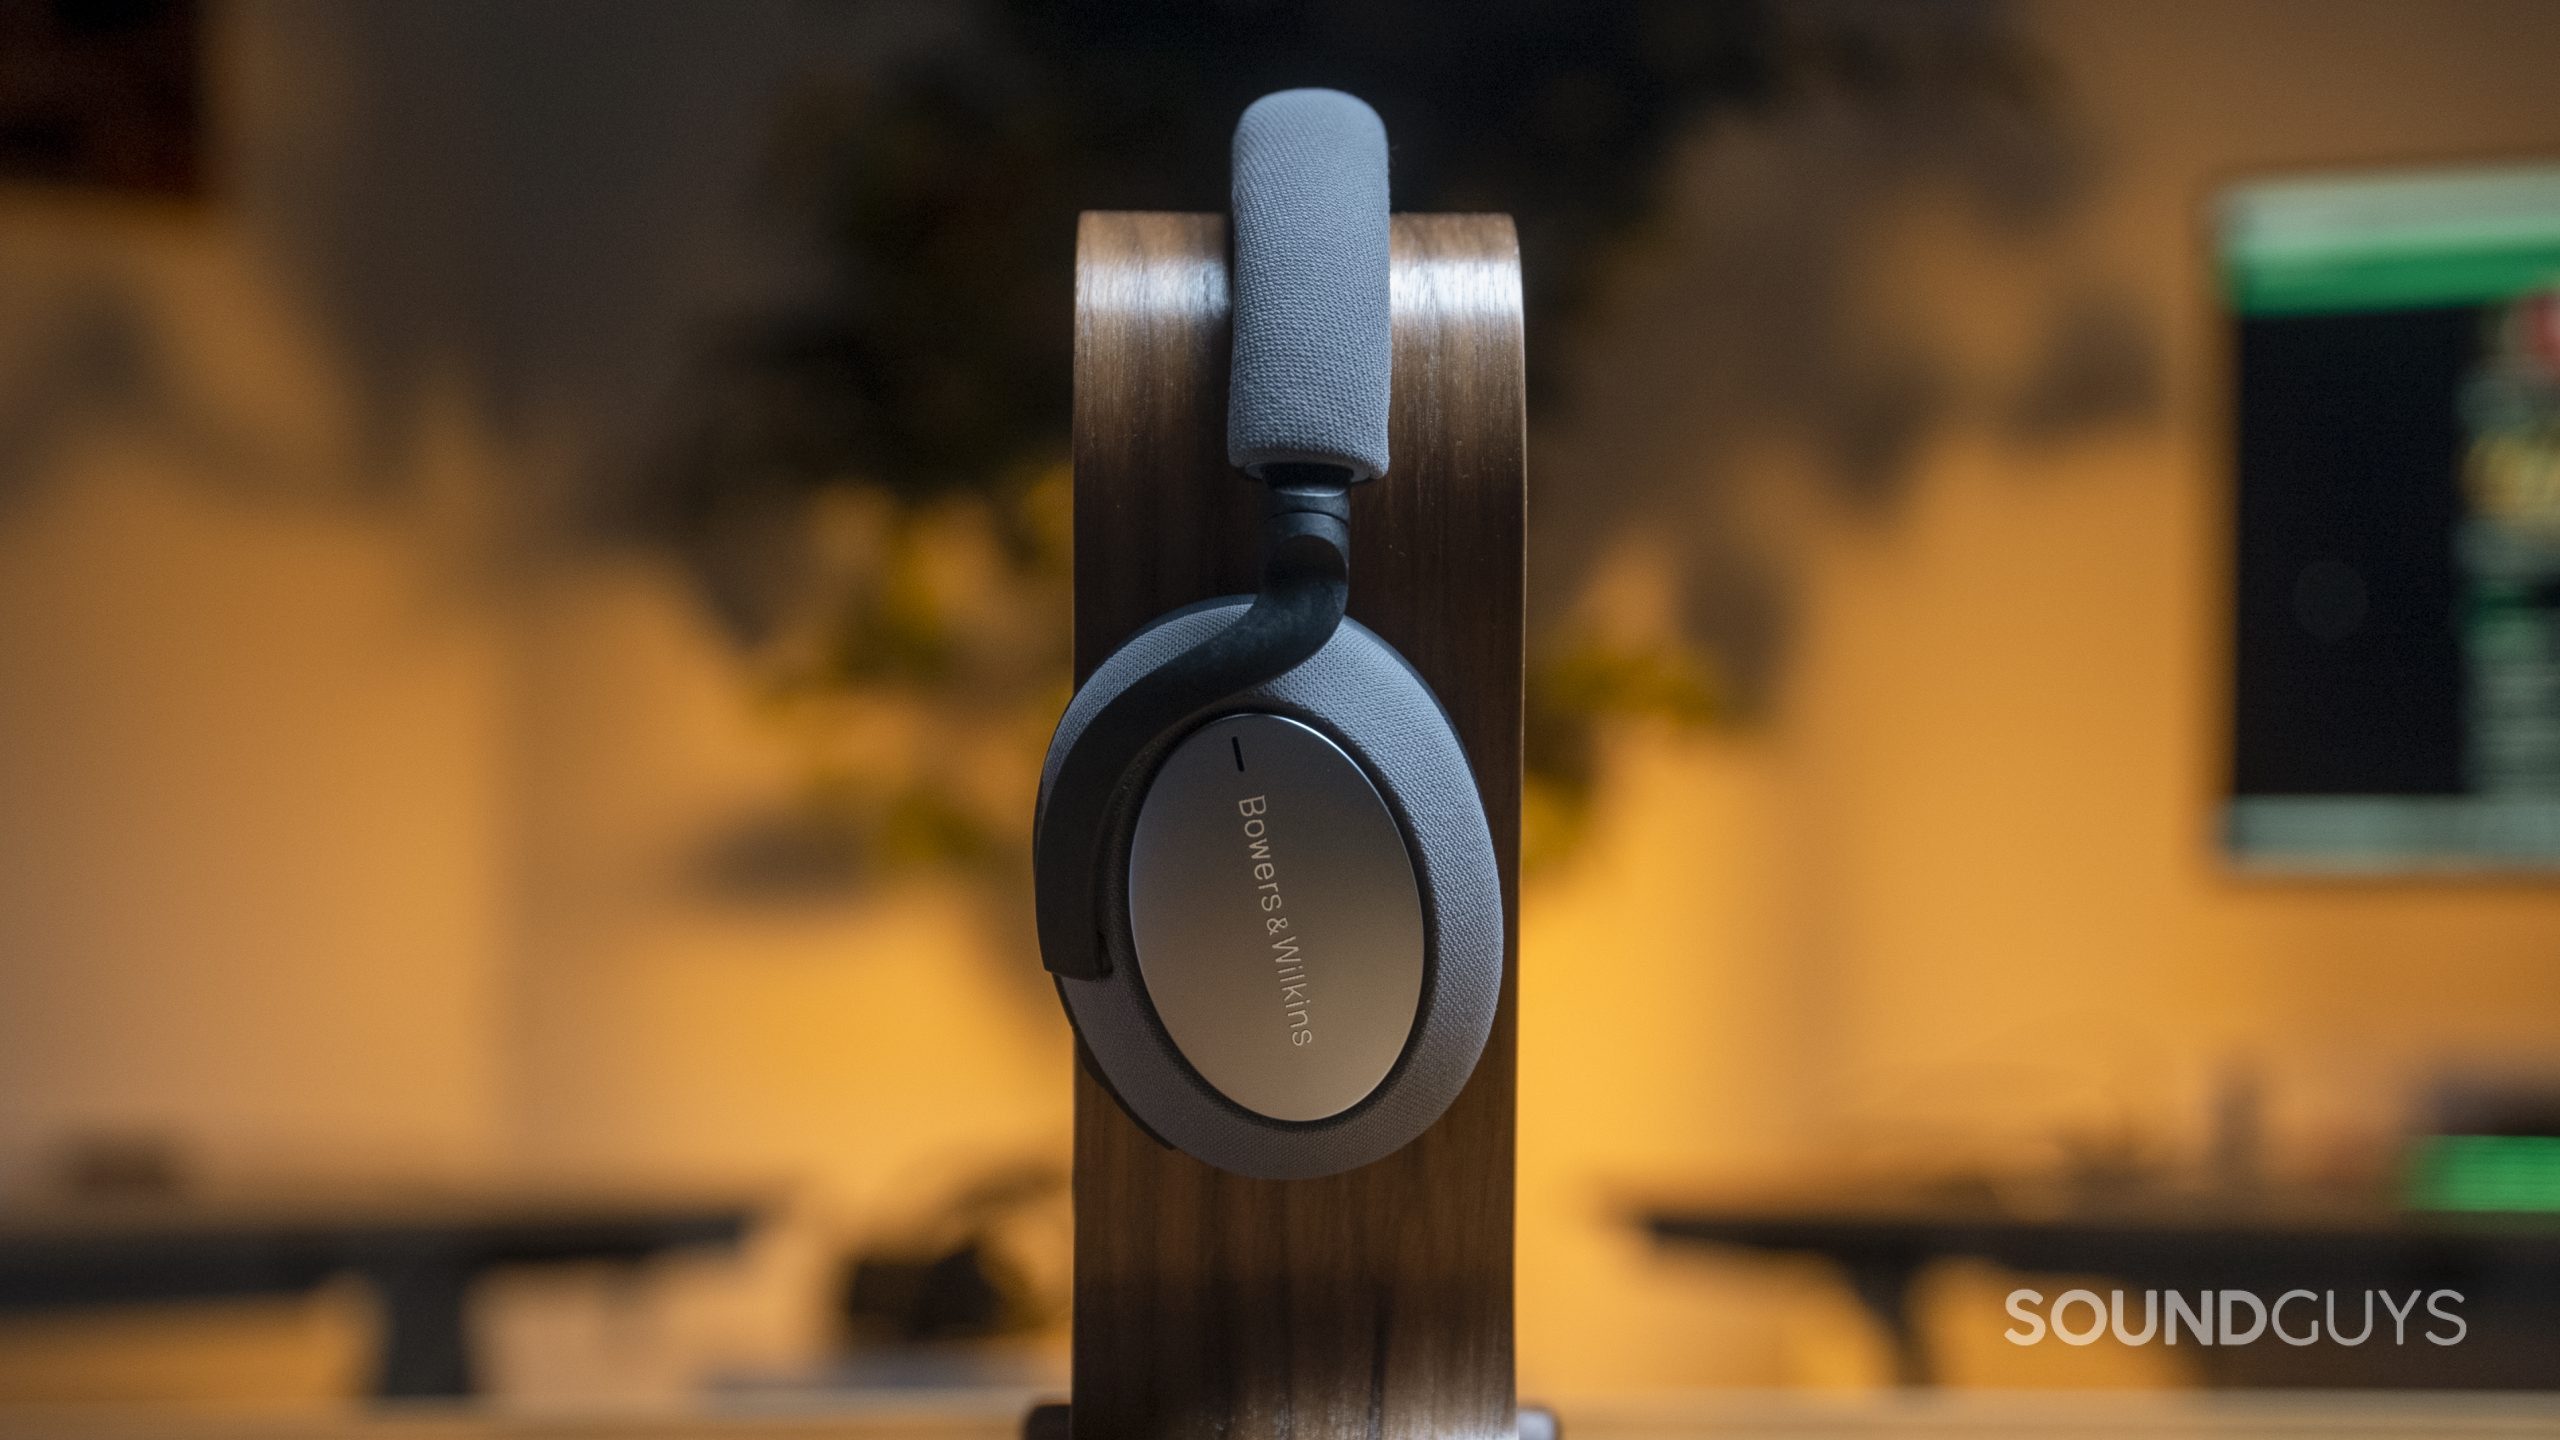 The Bowers & Wilkins PX7 sitting on a headphone stand.